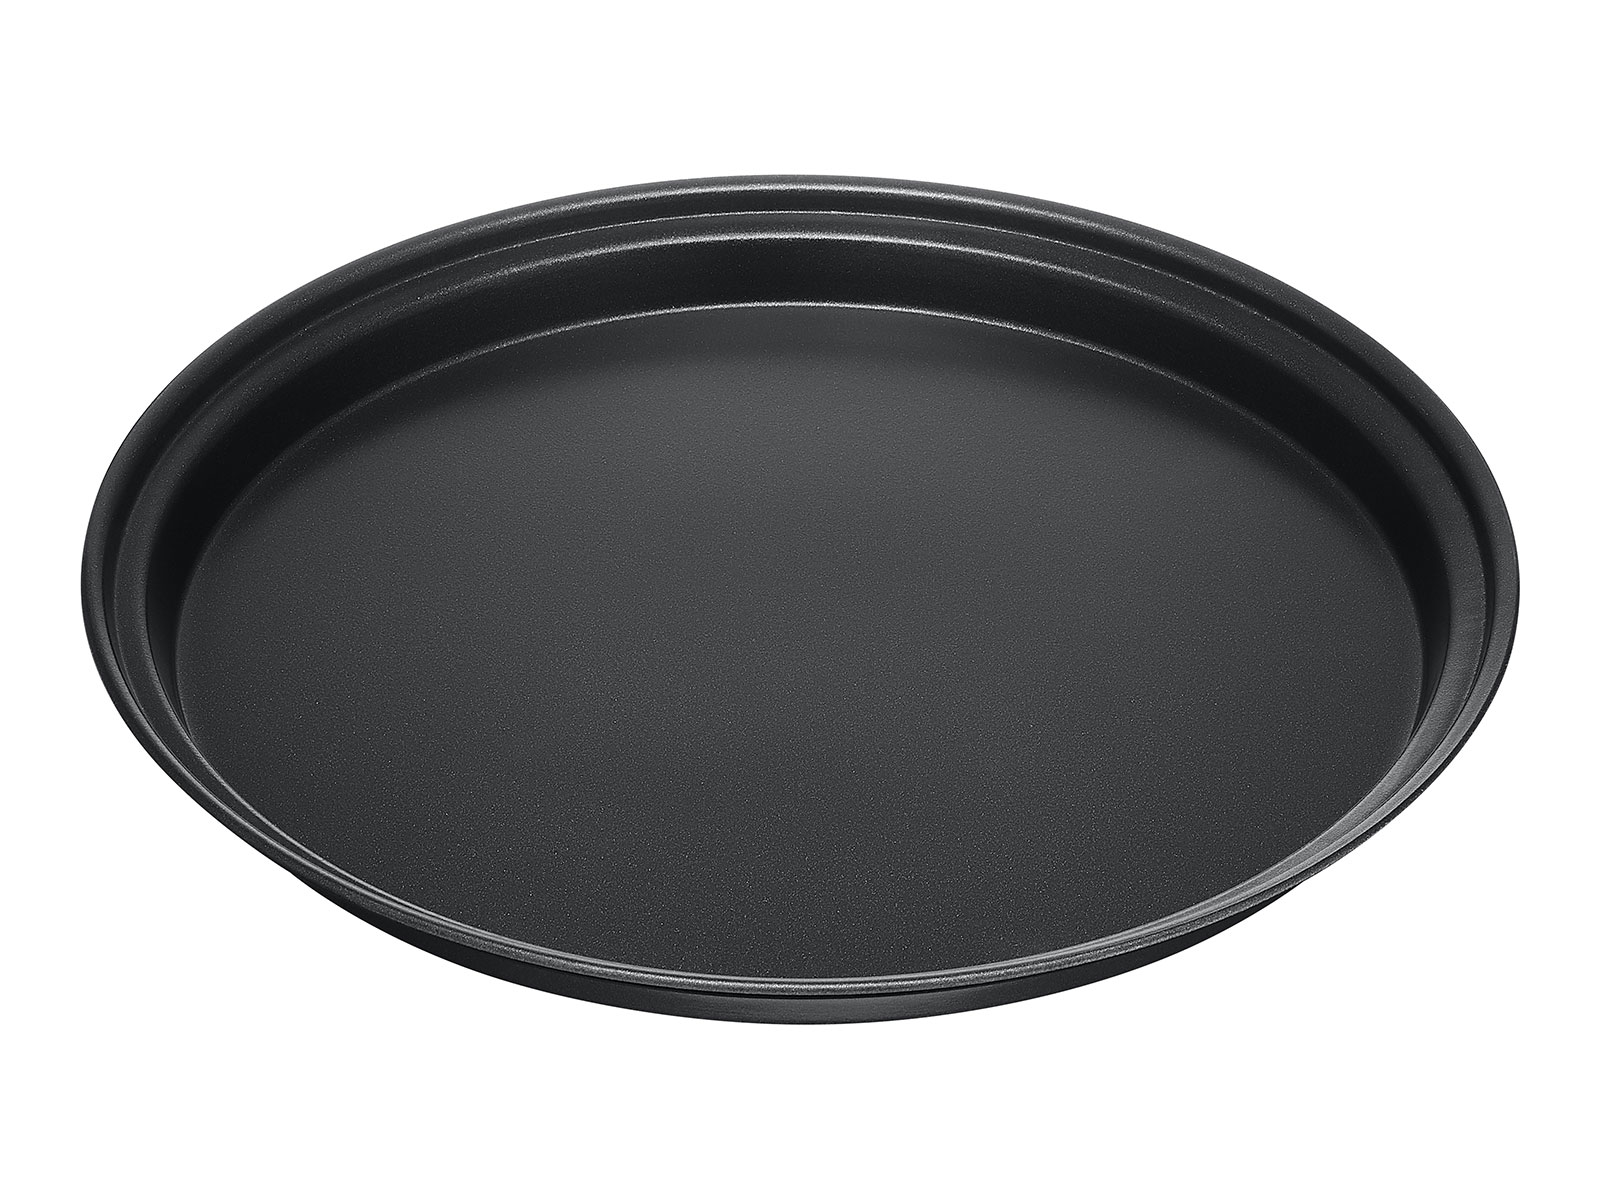 https://image-us.samsung.com/SamsungUS/home/home-appliances/microwaves/40620/gallery/PDP-Gallery-MG11T5018CC-AA_009_Crusty-Plate_Cotta-Charcoal-1600x1200.jpg?$product-details-jpg$